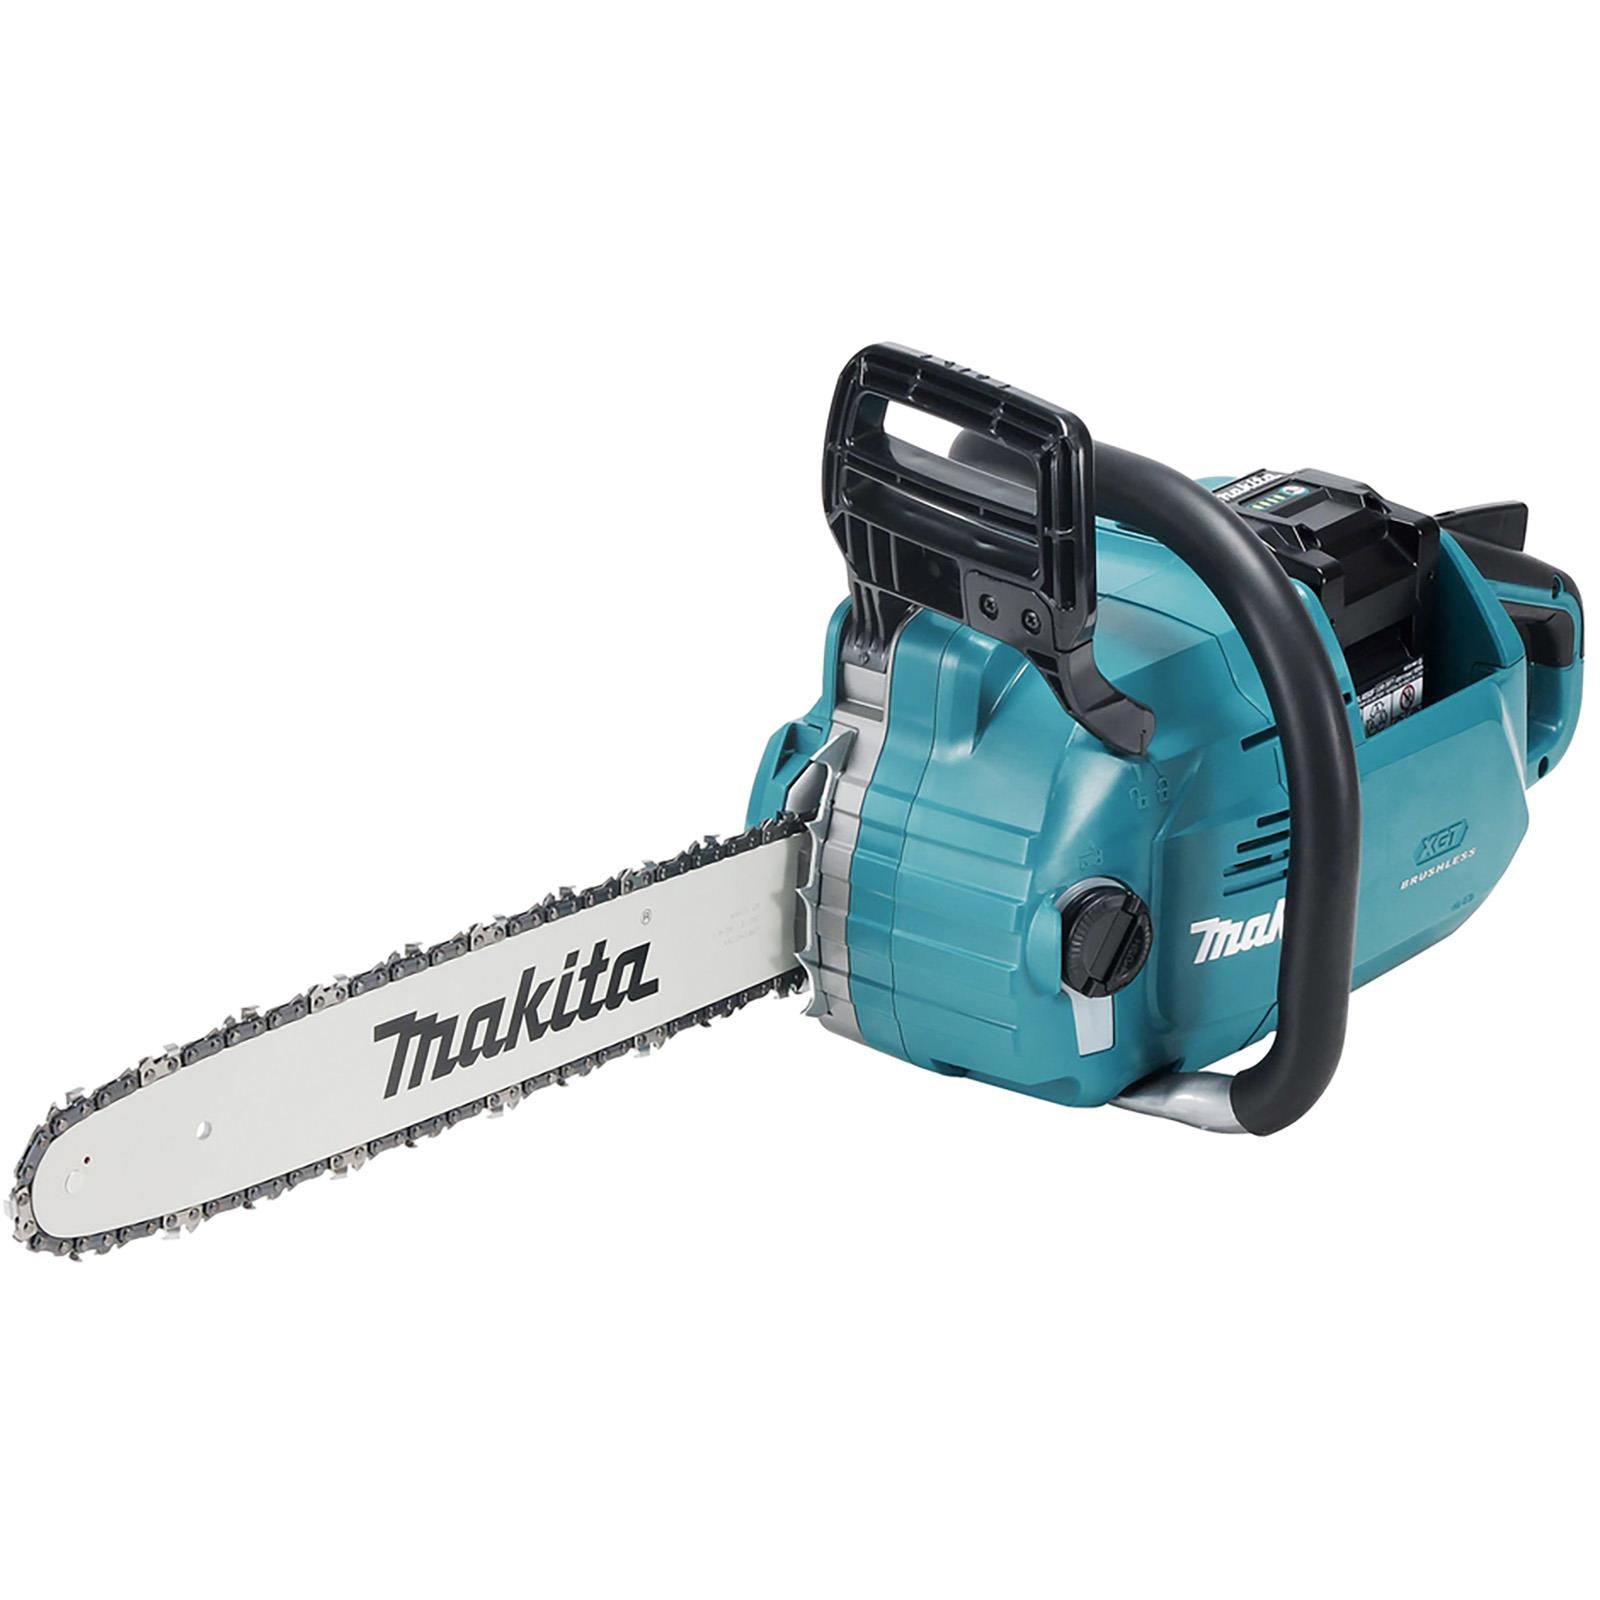 Makita Chainsaw Kit 40cm Heavy Duty 16" 40V XGT Brushless Cordless 2 x 5Ah Battery and Rapid Charger Garden Tree Cutting Pruning UC016GT201